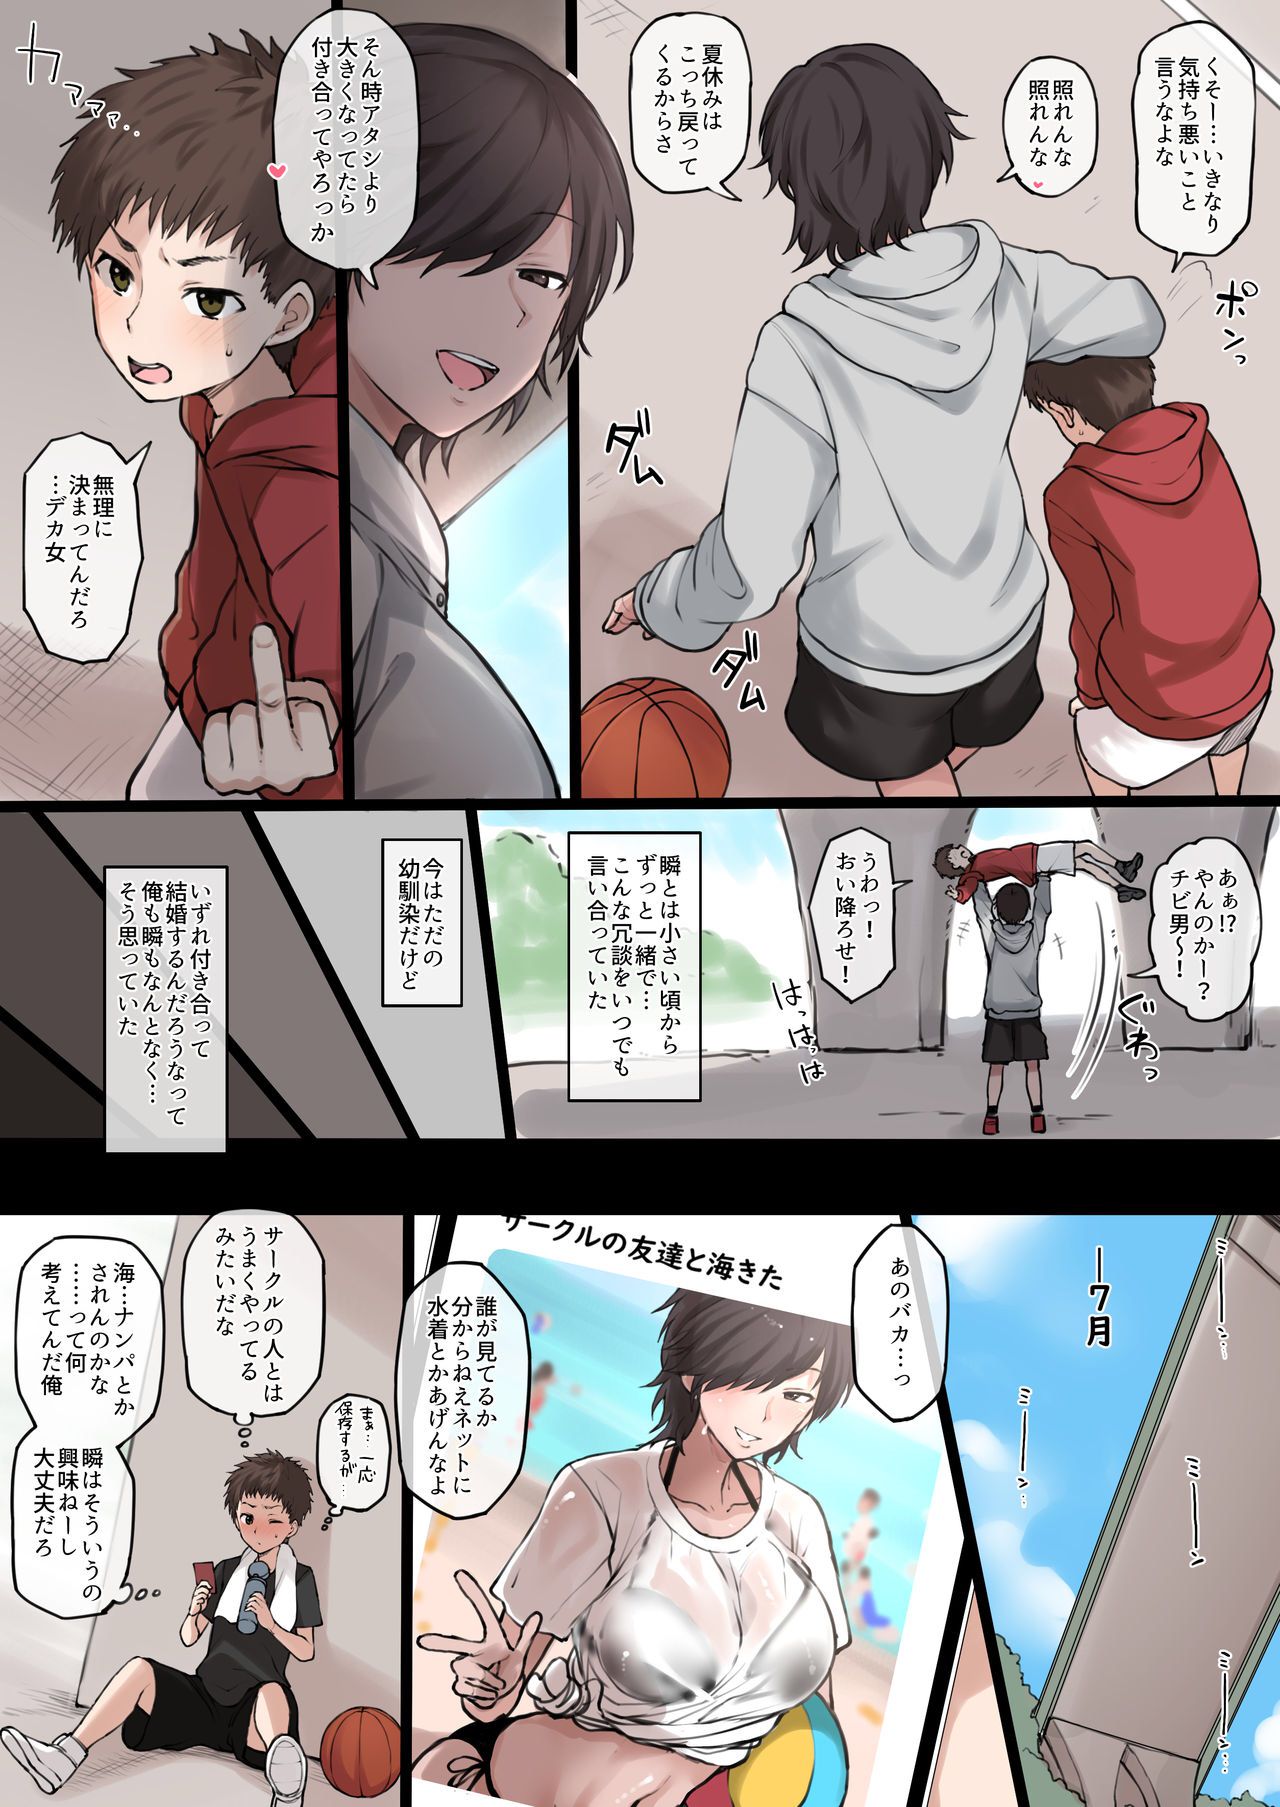 【Image】The most erotic club activity is the women's volleyball club wwwwww 26